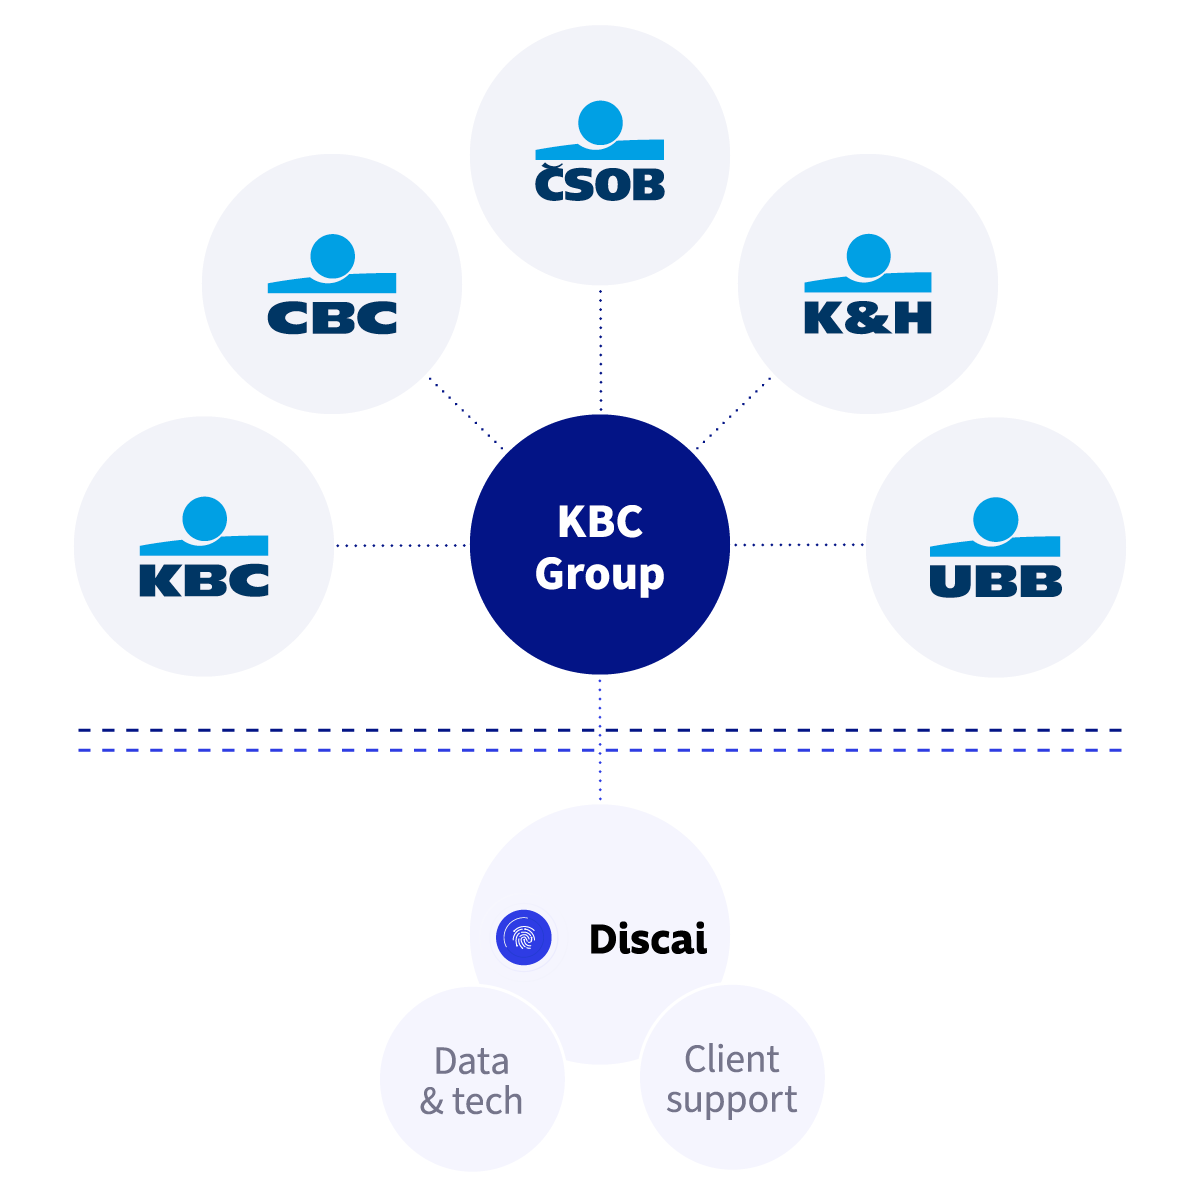 The link between KBC group and Discai